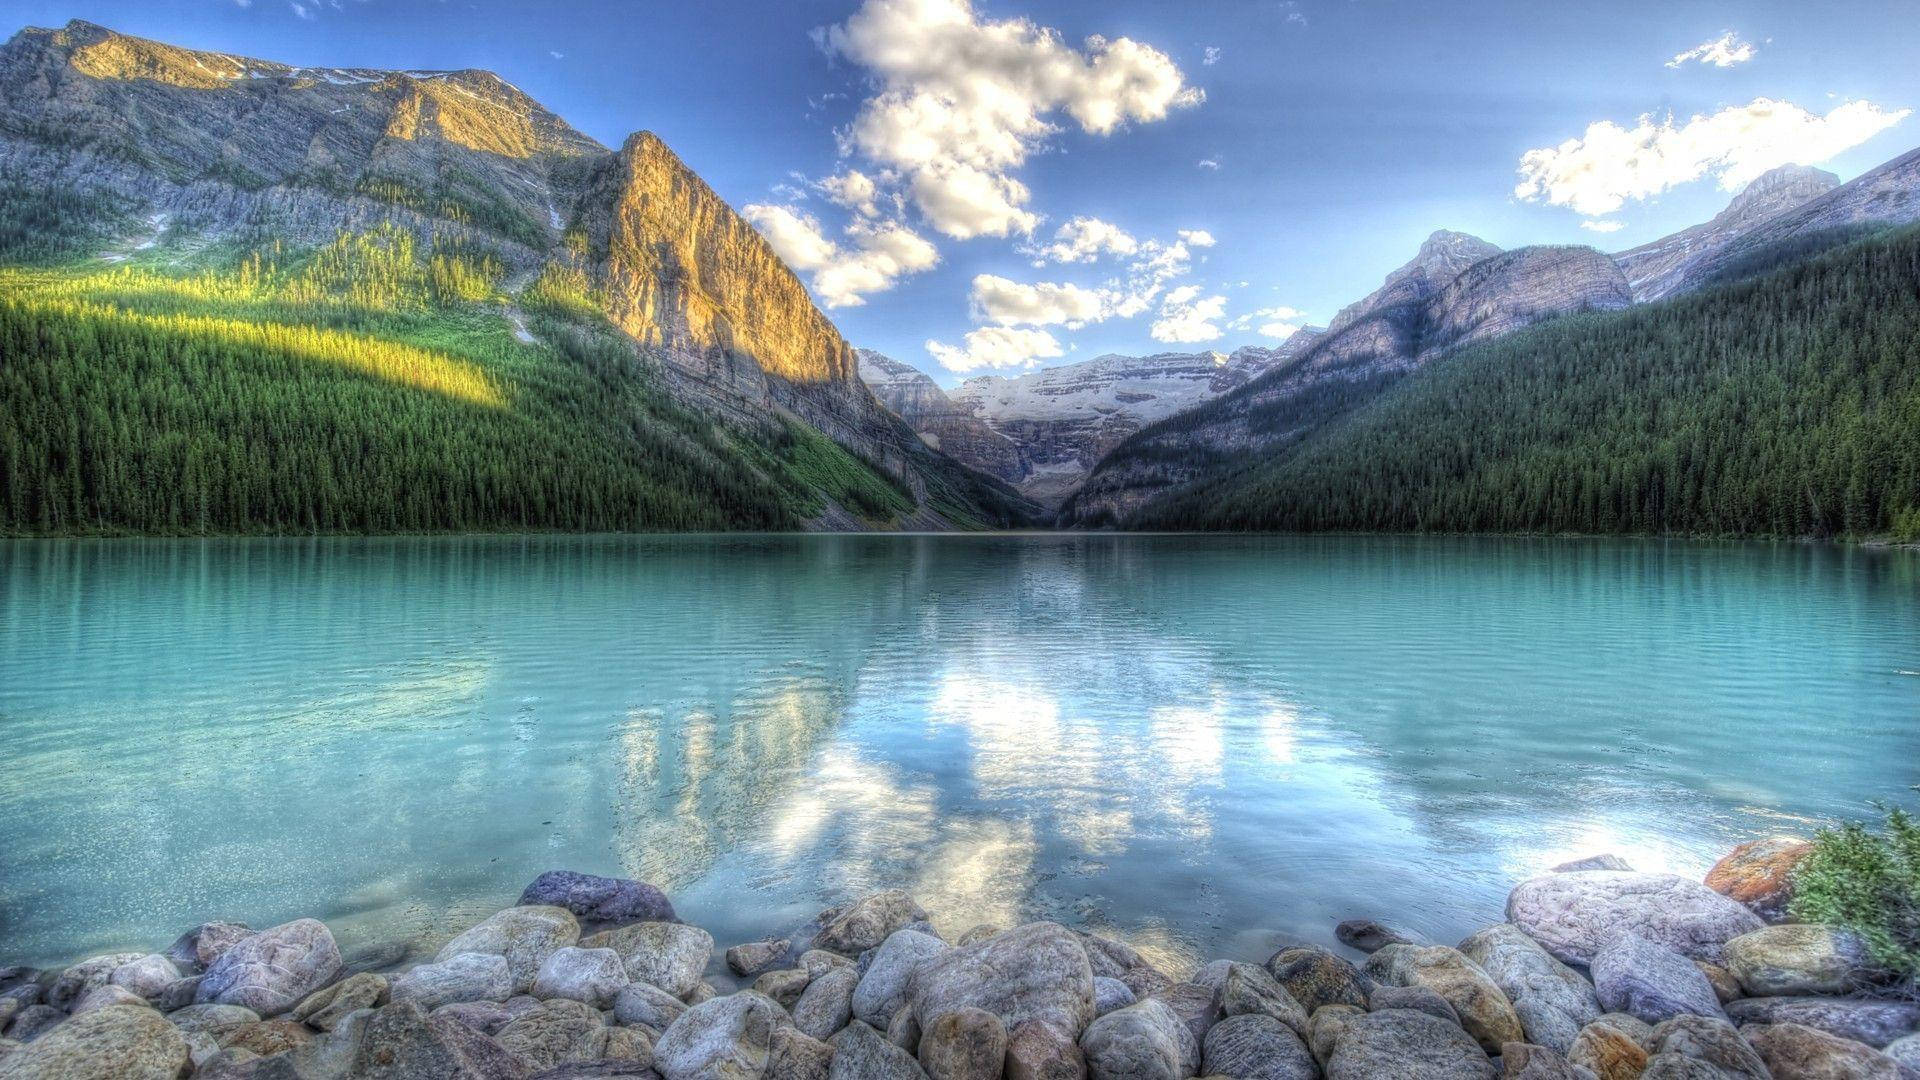 A beautiful lake with mountains in the background - Lake